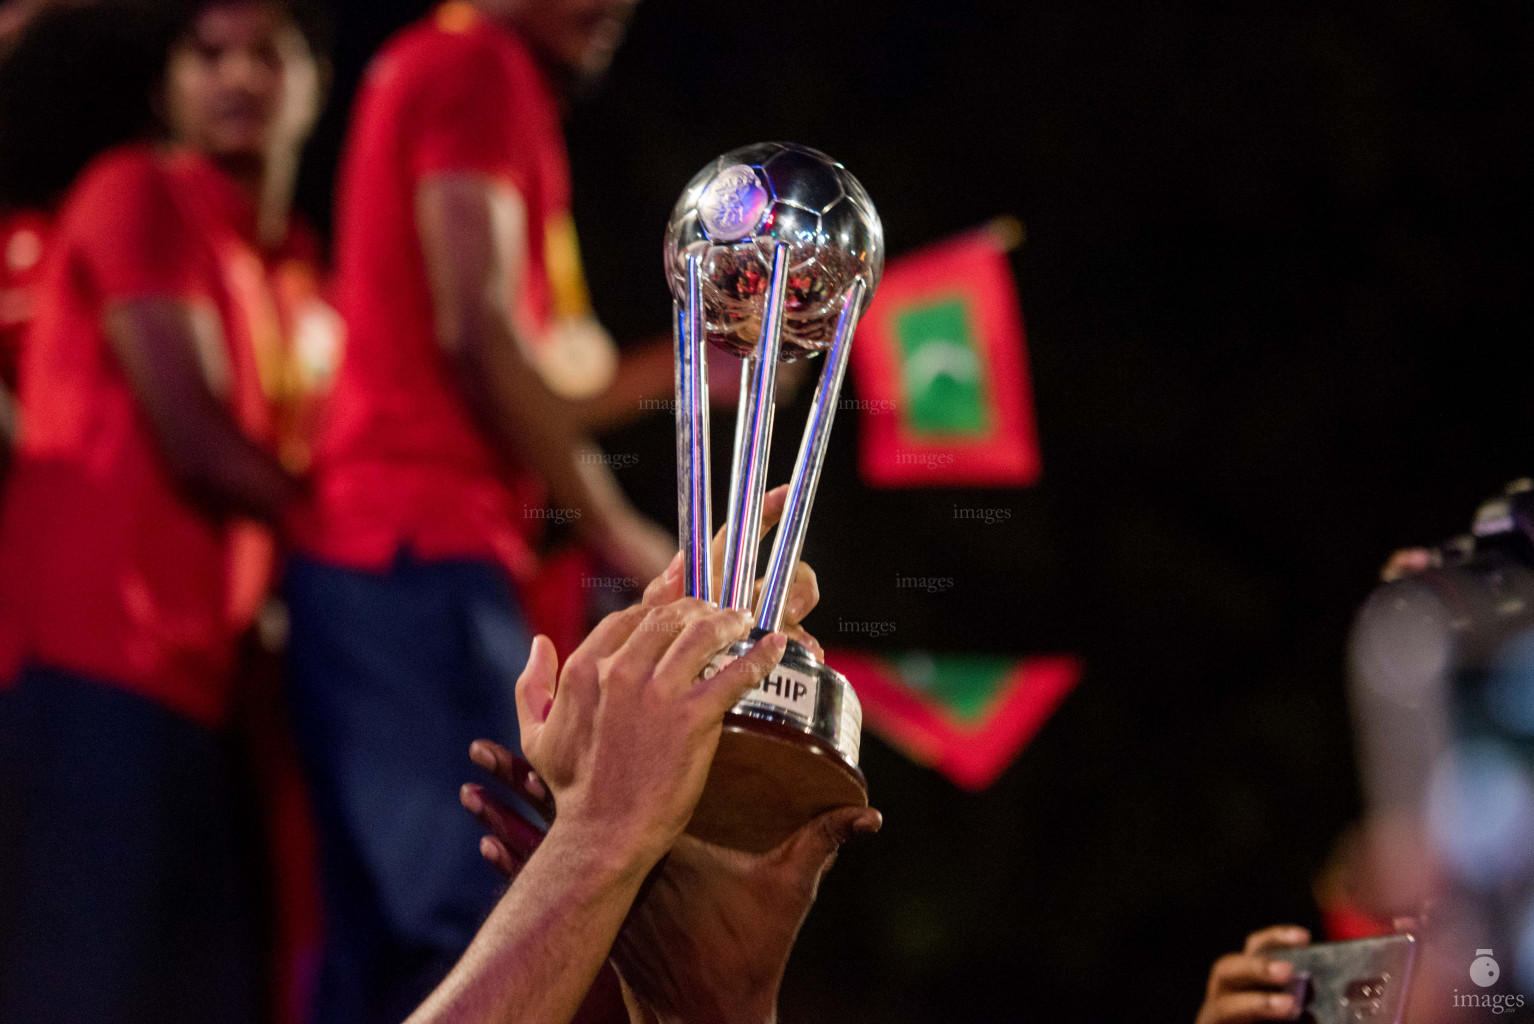 Maldivian players and officials celebrate after winning the SAFF Championship,  2018 (Photo/ Suadh Abdul Sattar)